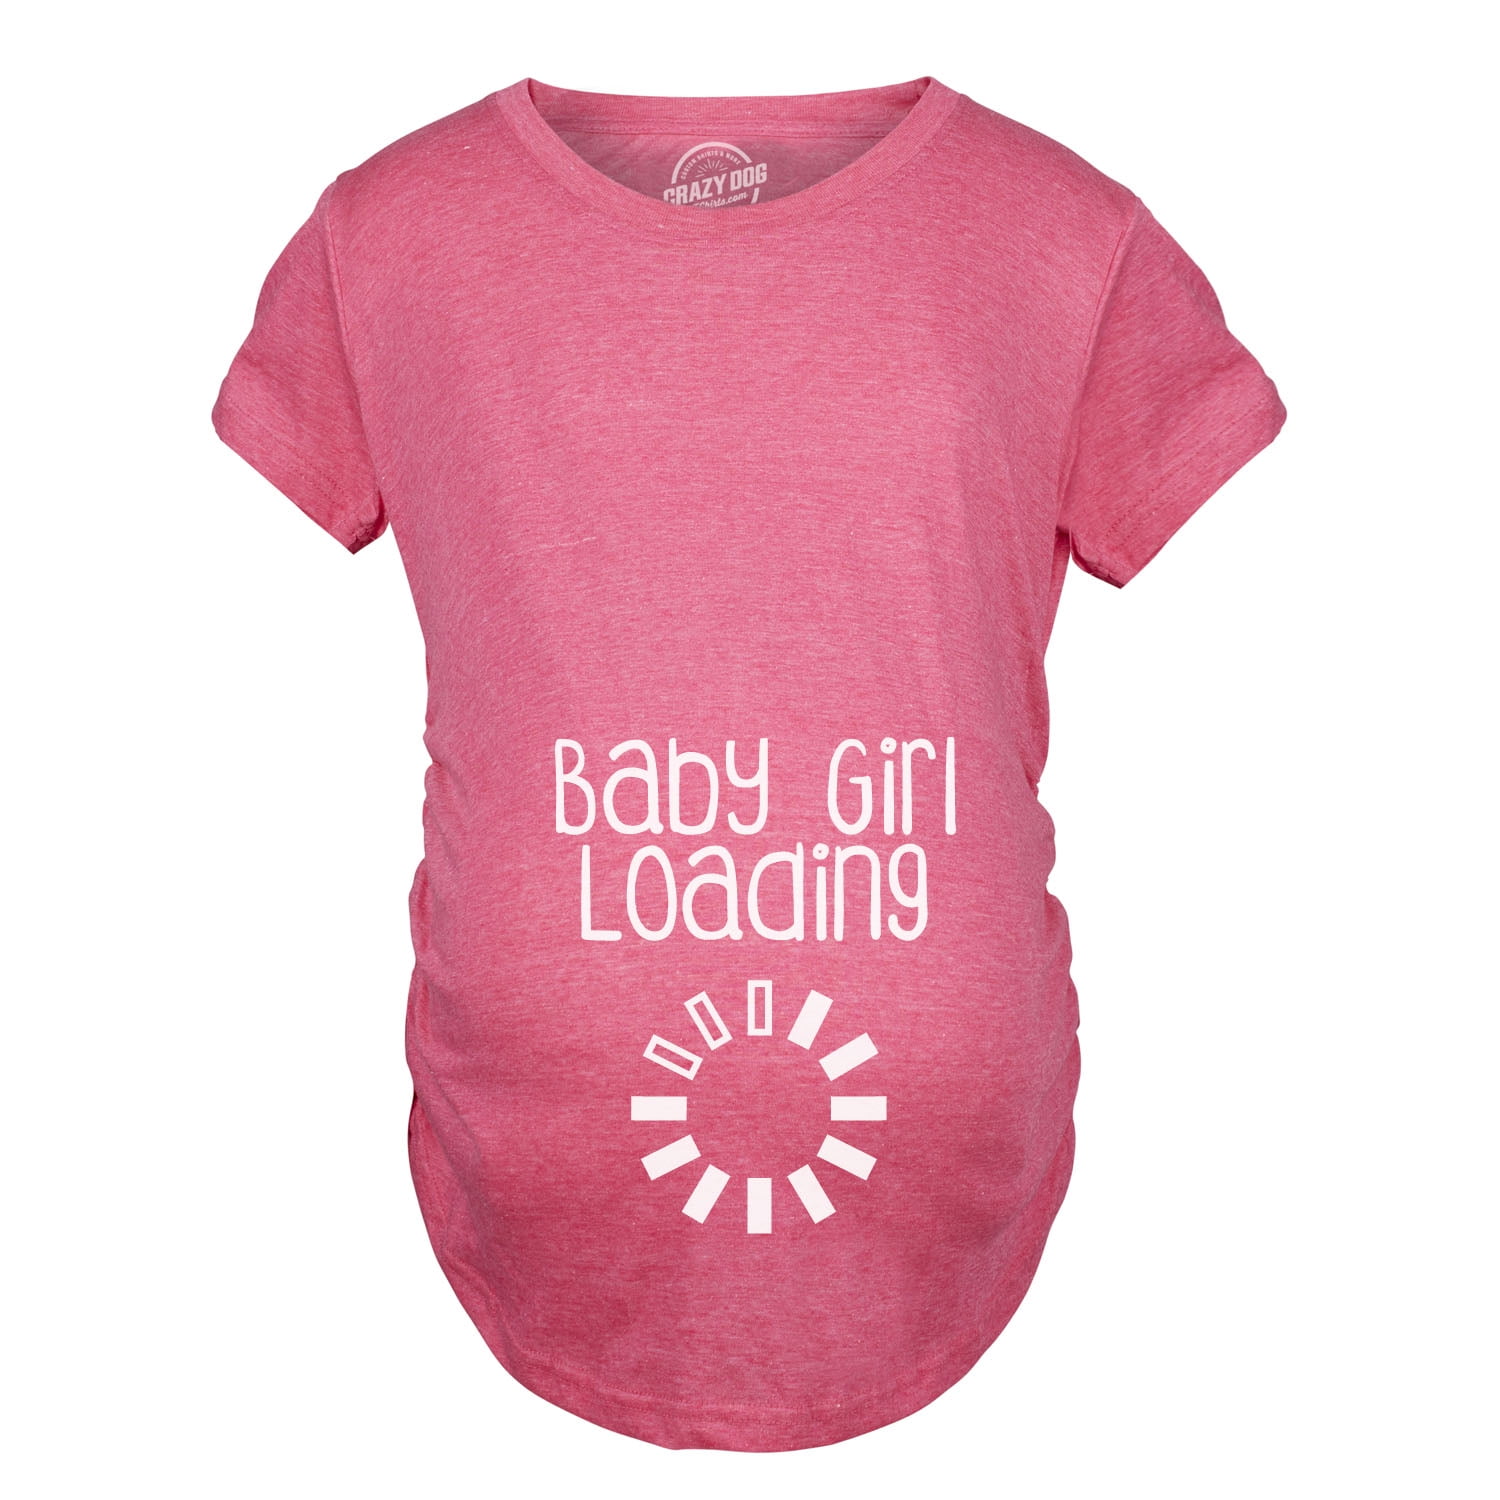 Maternity Baby Girl Loading T shirt Funny Pregnancy Announcement Reveal  Cool Tee (Pink) - L 